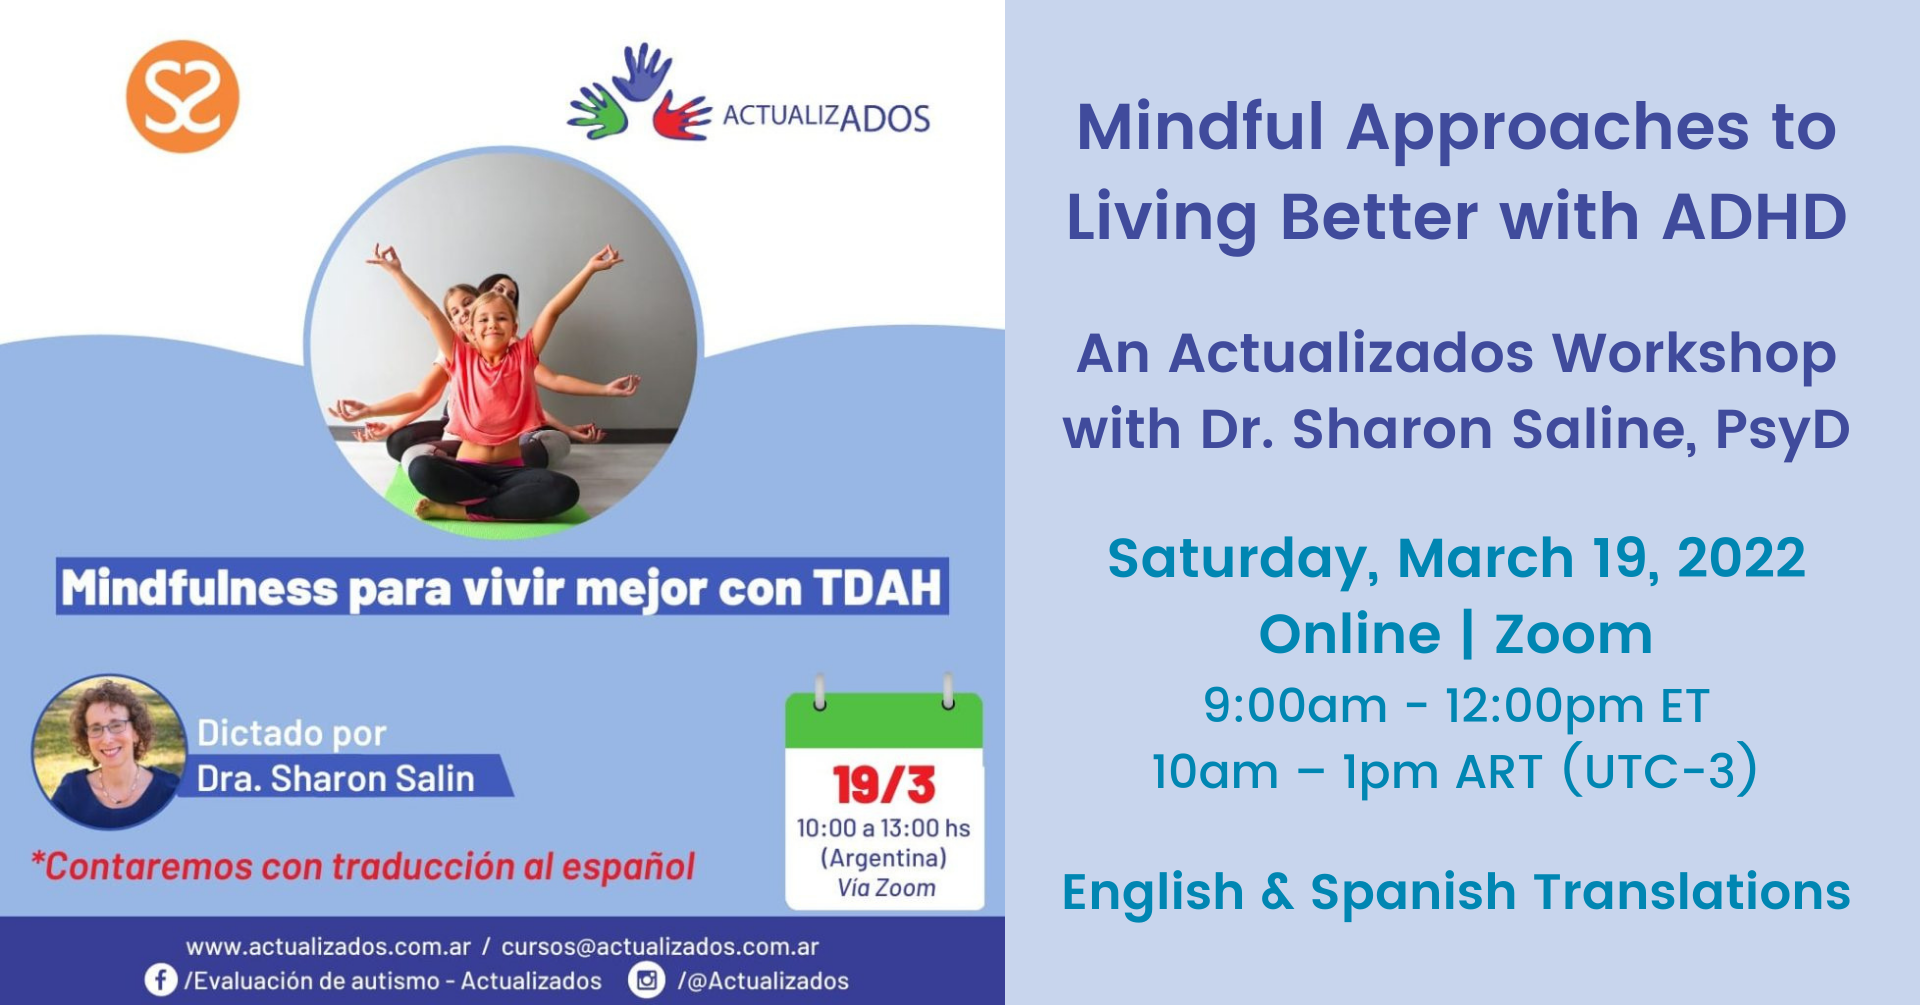 Event promo graphic says "Mindful Approaches to Living Better with ADHD" An Actualizados Workshop with Dr. Sharon Saline, PsyD, Saturday, March 19, 2022, Online, Zoom, 9:00am - 12:00pm ET, 10am – 1pm ART (UTC-3), English & Spanish Translations"